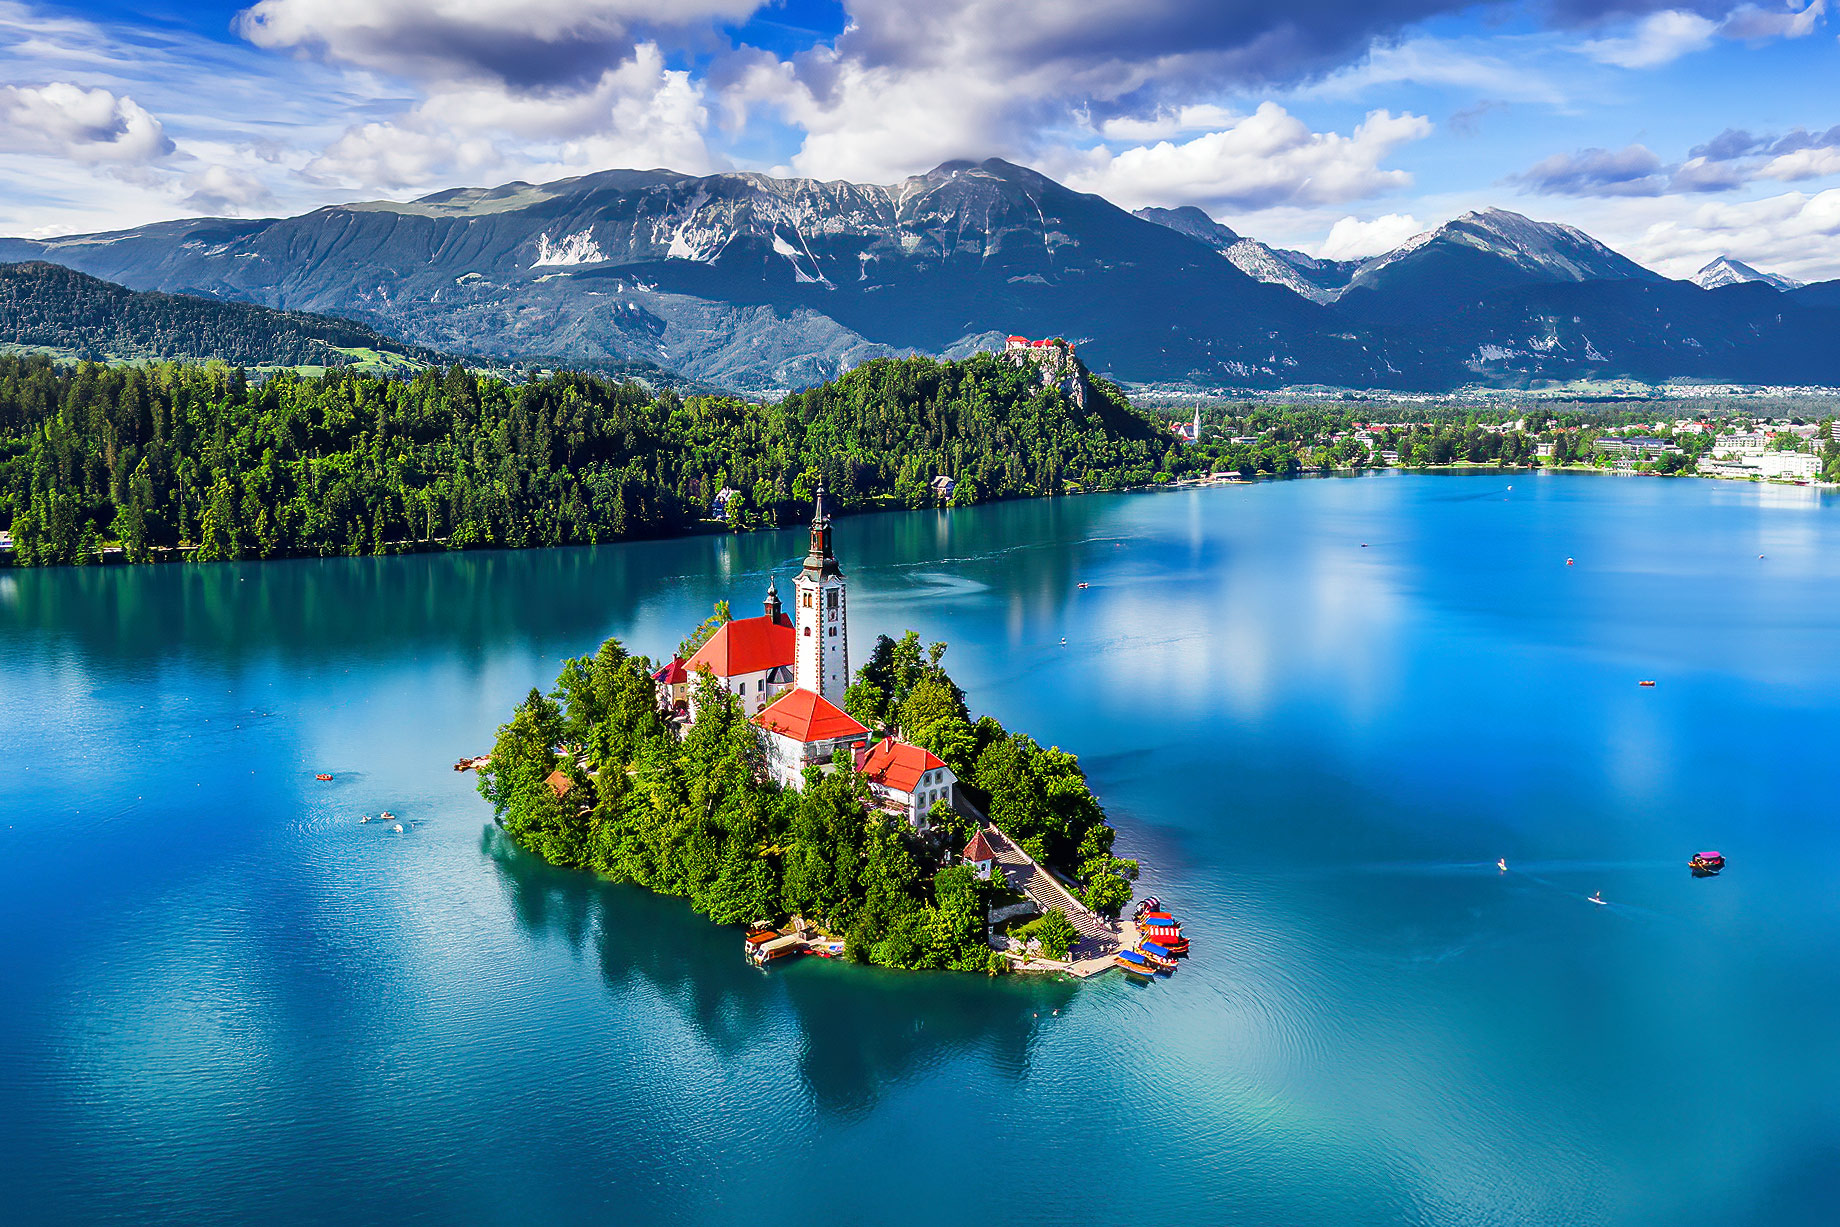 Lake Bled, Slovenia - Pilgrimage Church of The Assumption of Maria and Julian Alps